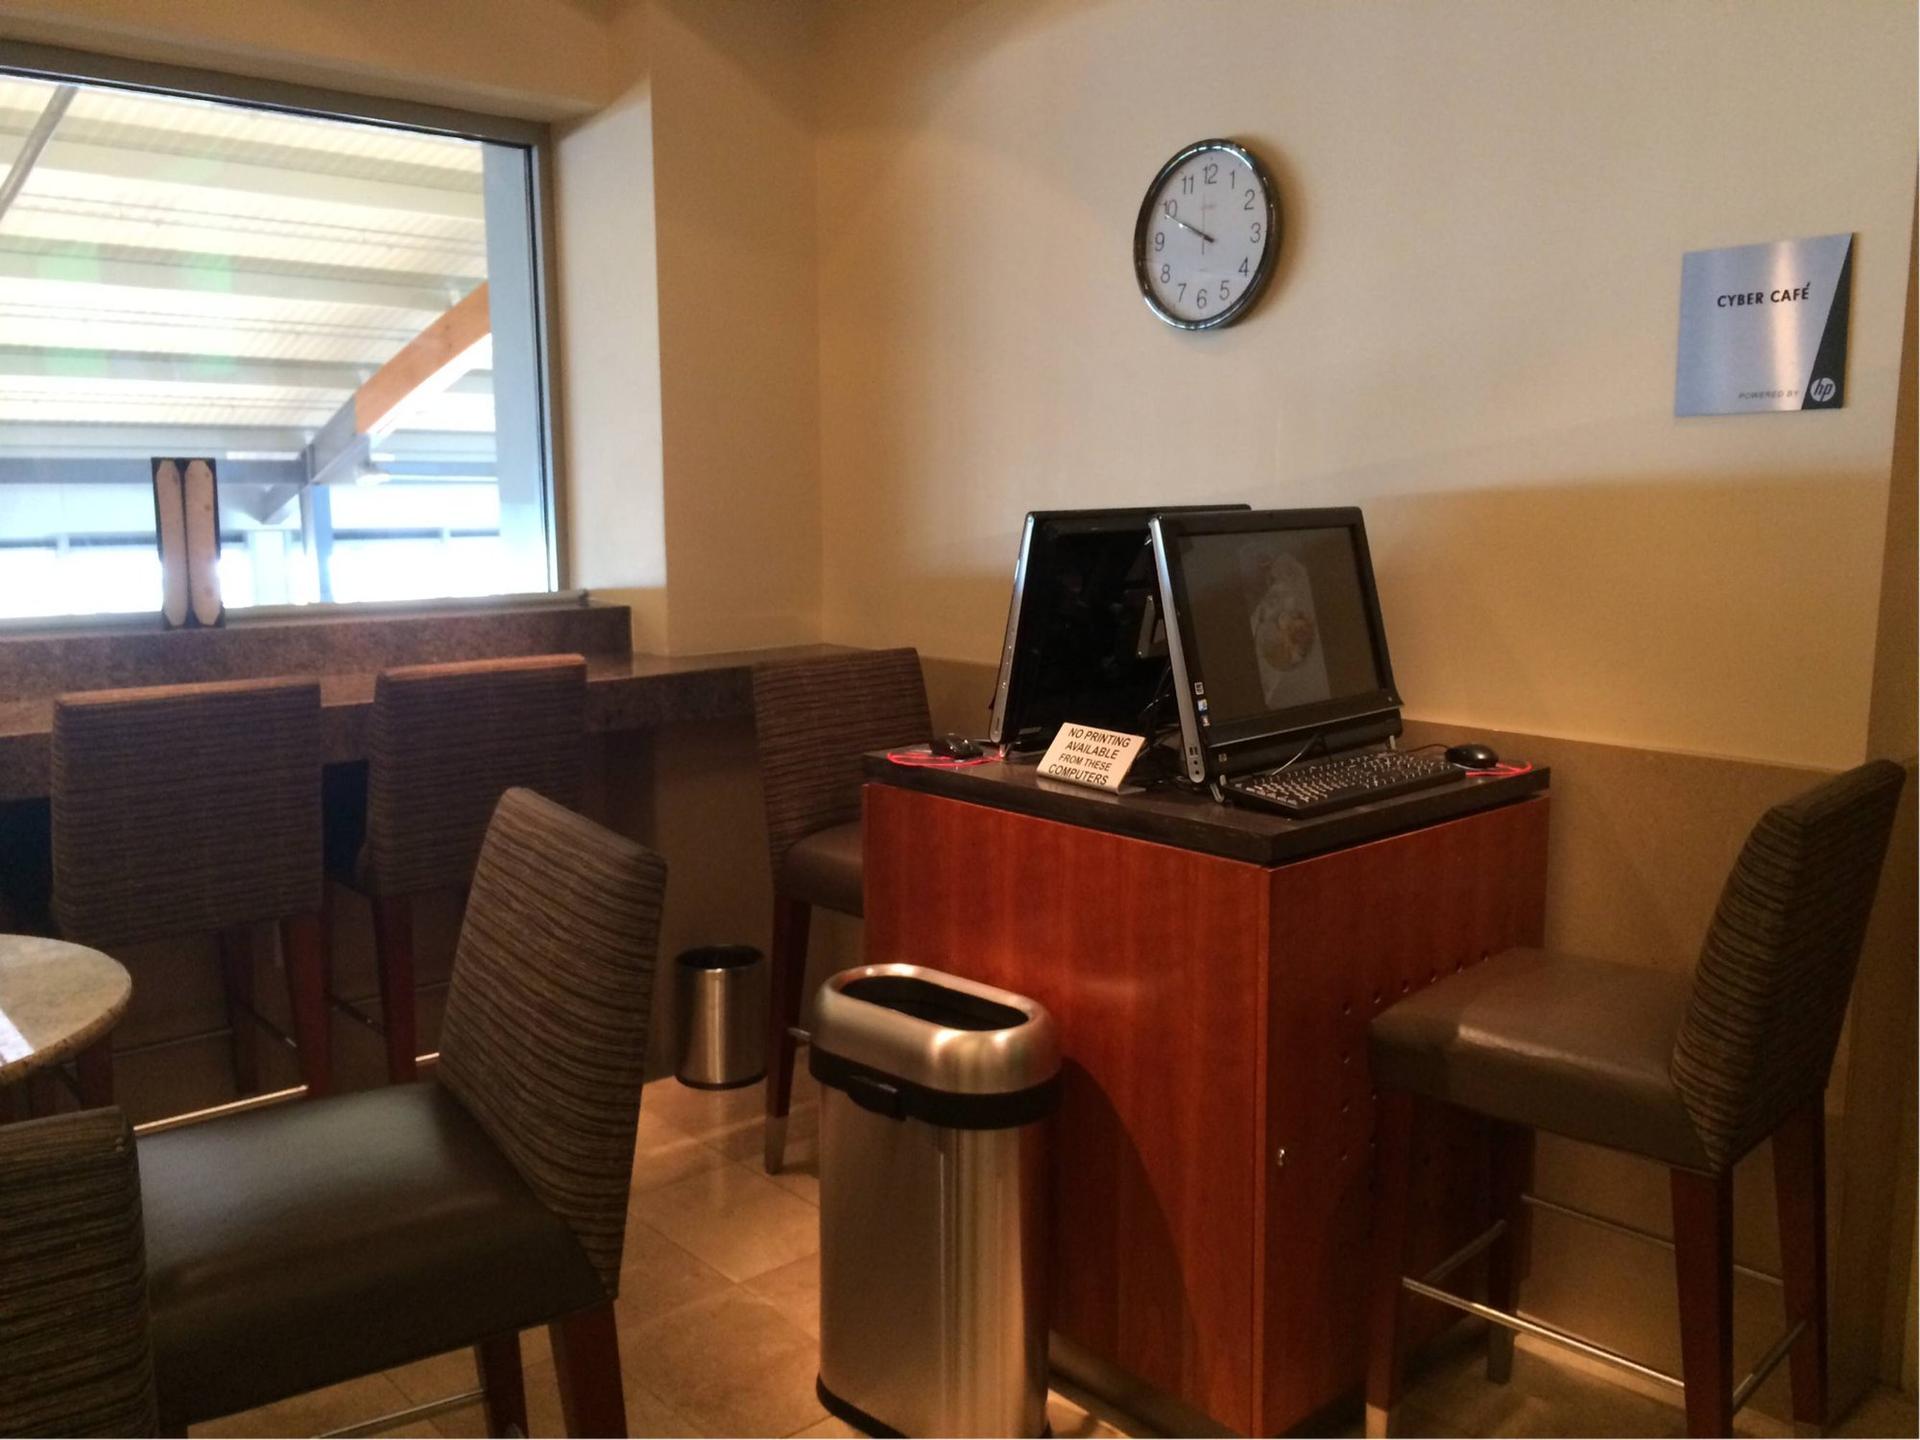 American Airlines Admirals Club image 16 of 31